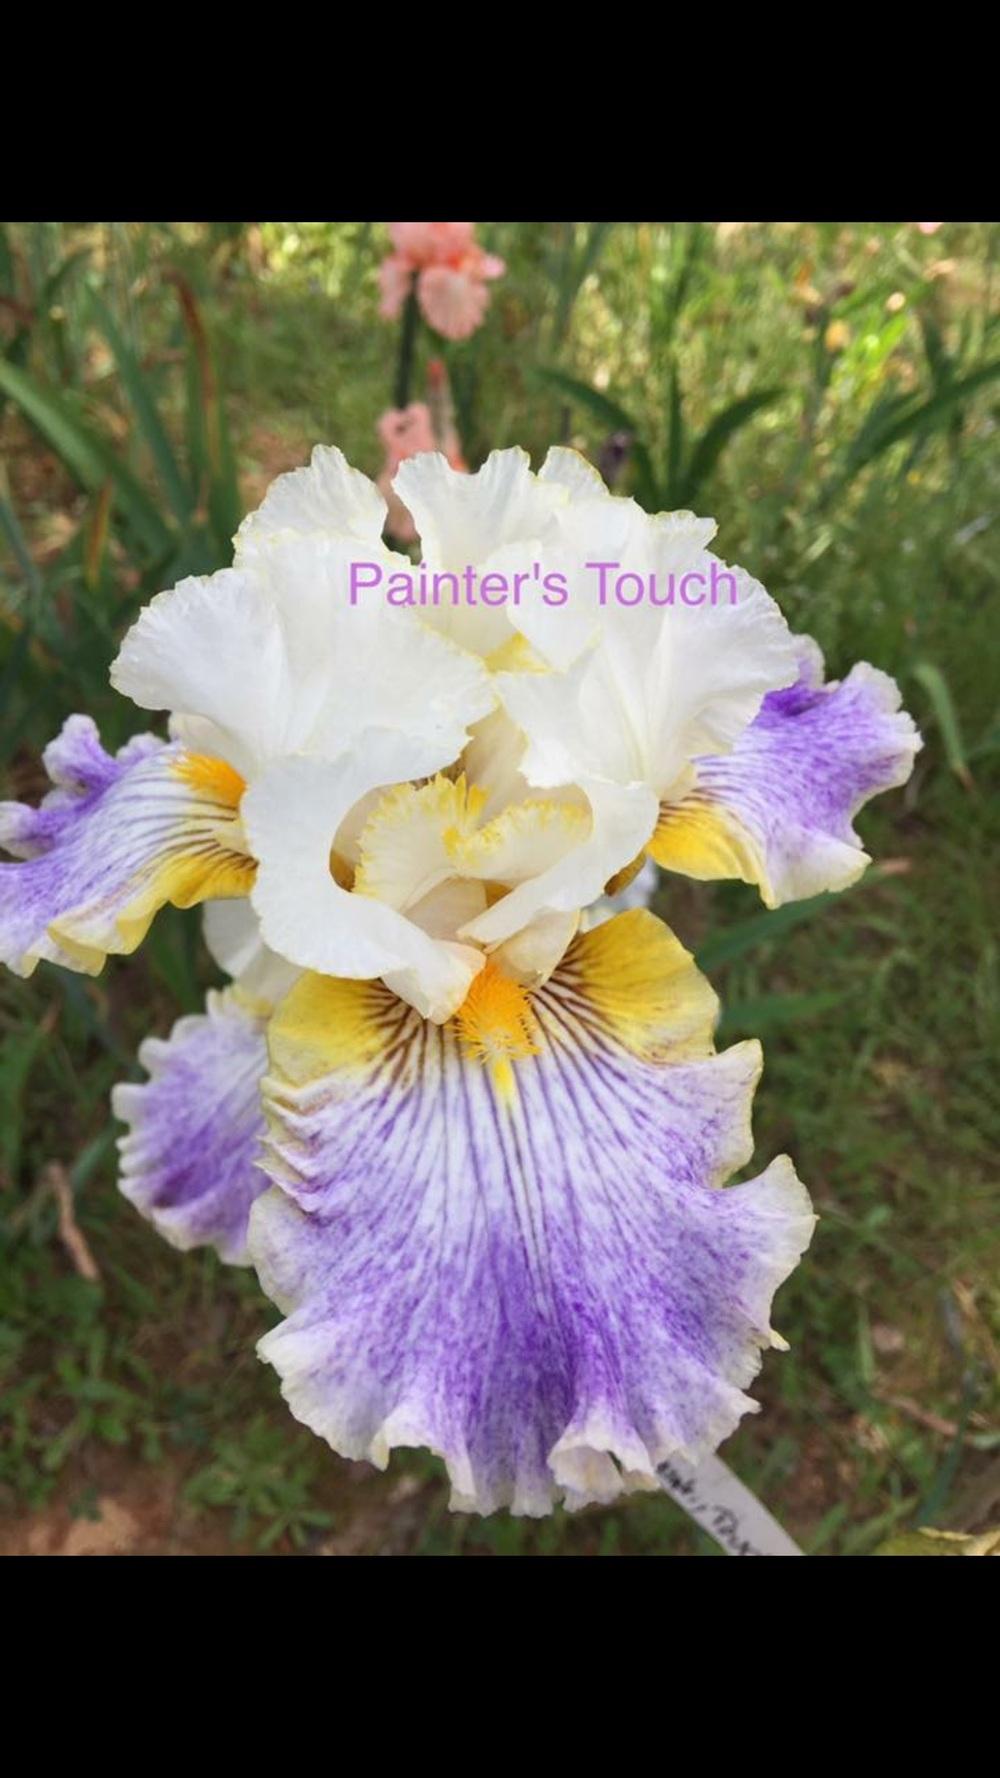 Photo of Tall Bearded Iris (Iris 'Painter's Touch') uploaded by Charriet